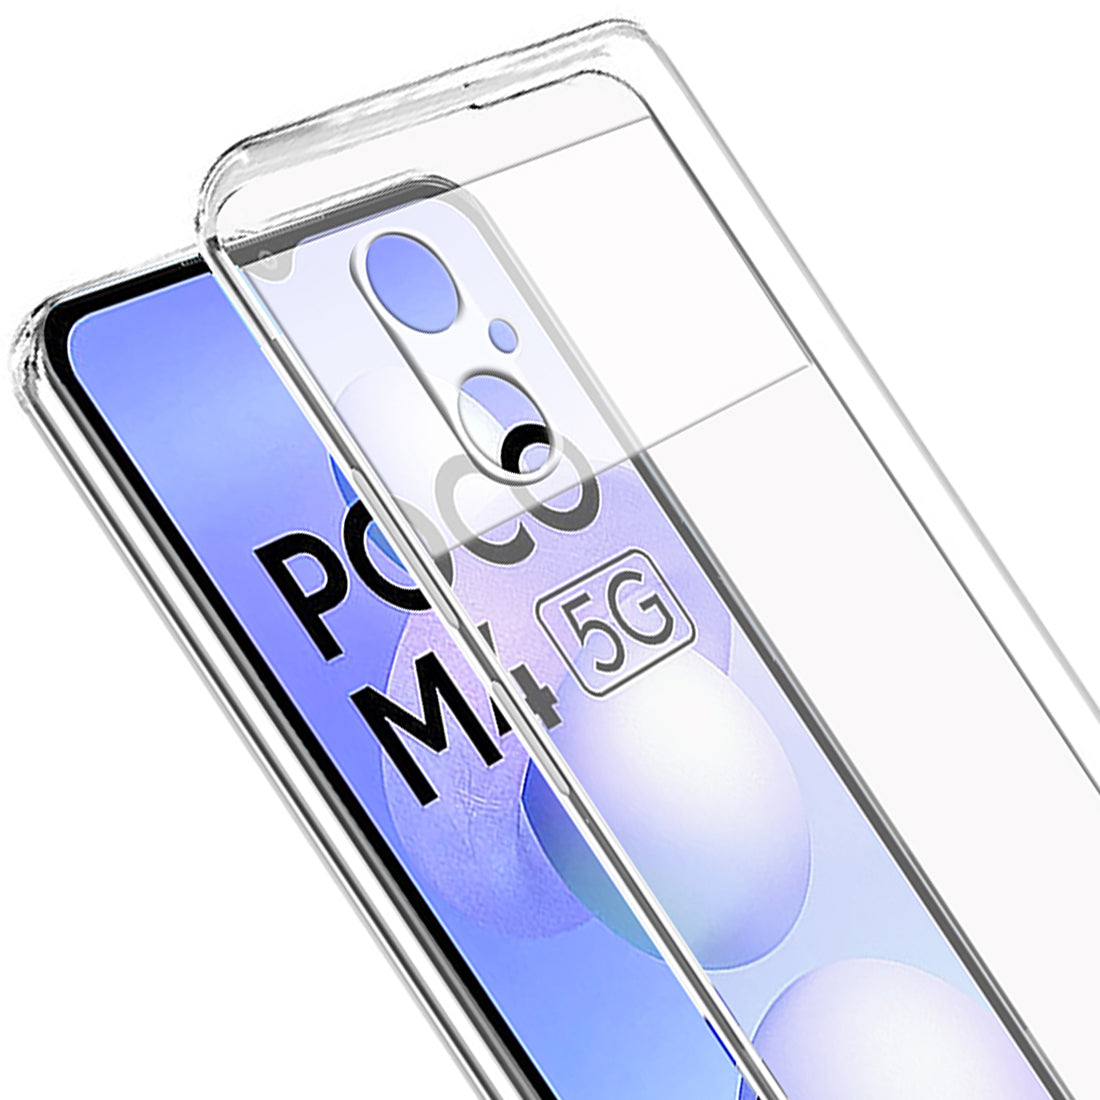 Clear Case for Poco M4 5G